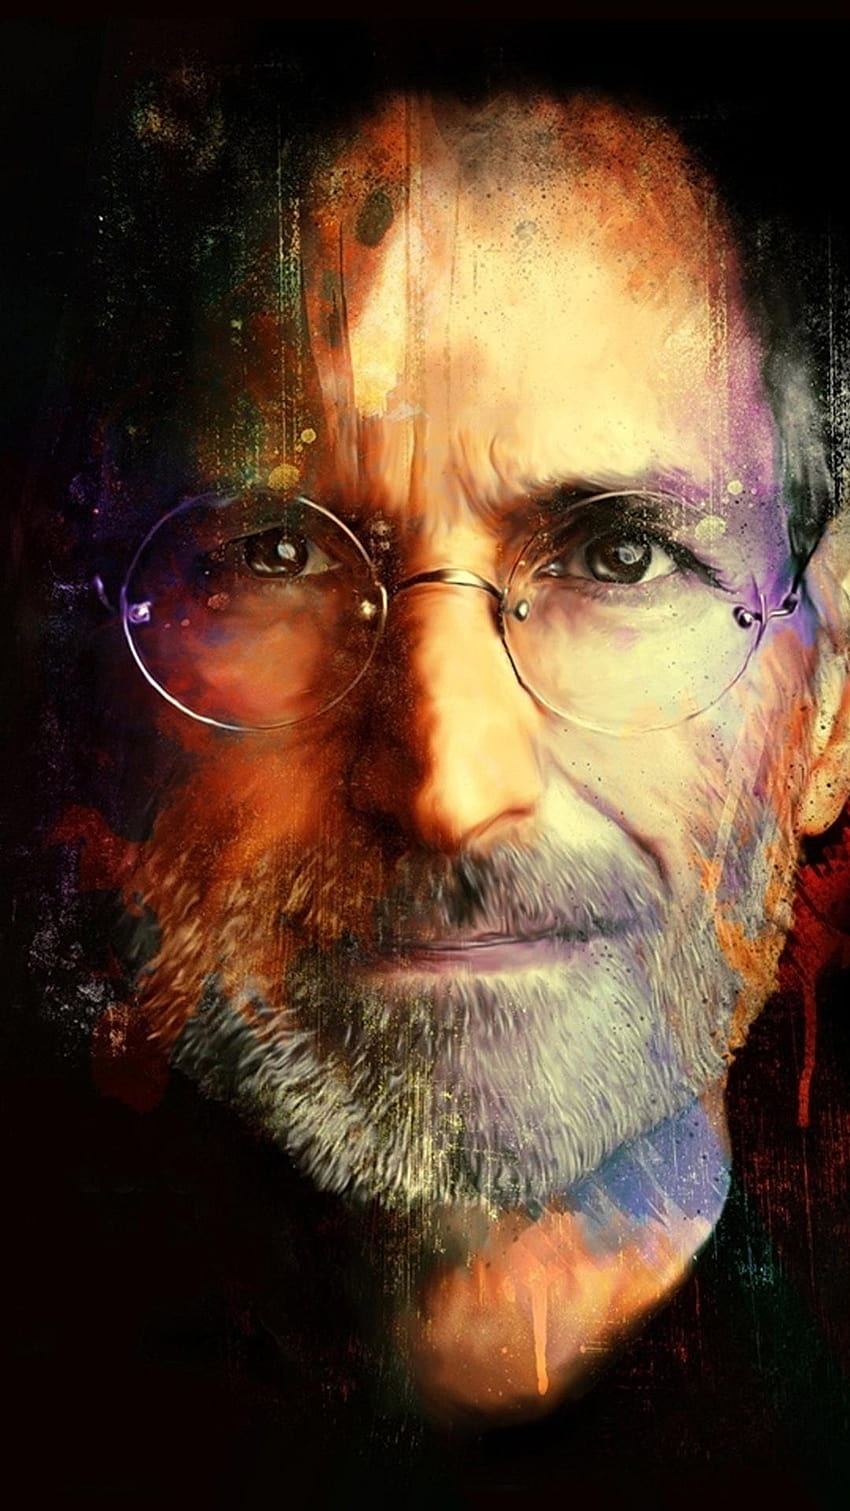 Steve Jobs tribute for iPhone 6 and iPhone 6 Plus HD phone wallpaper